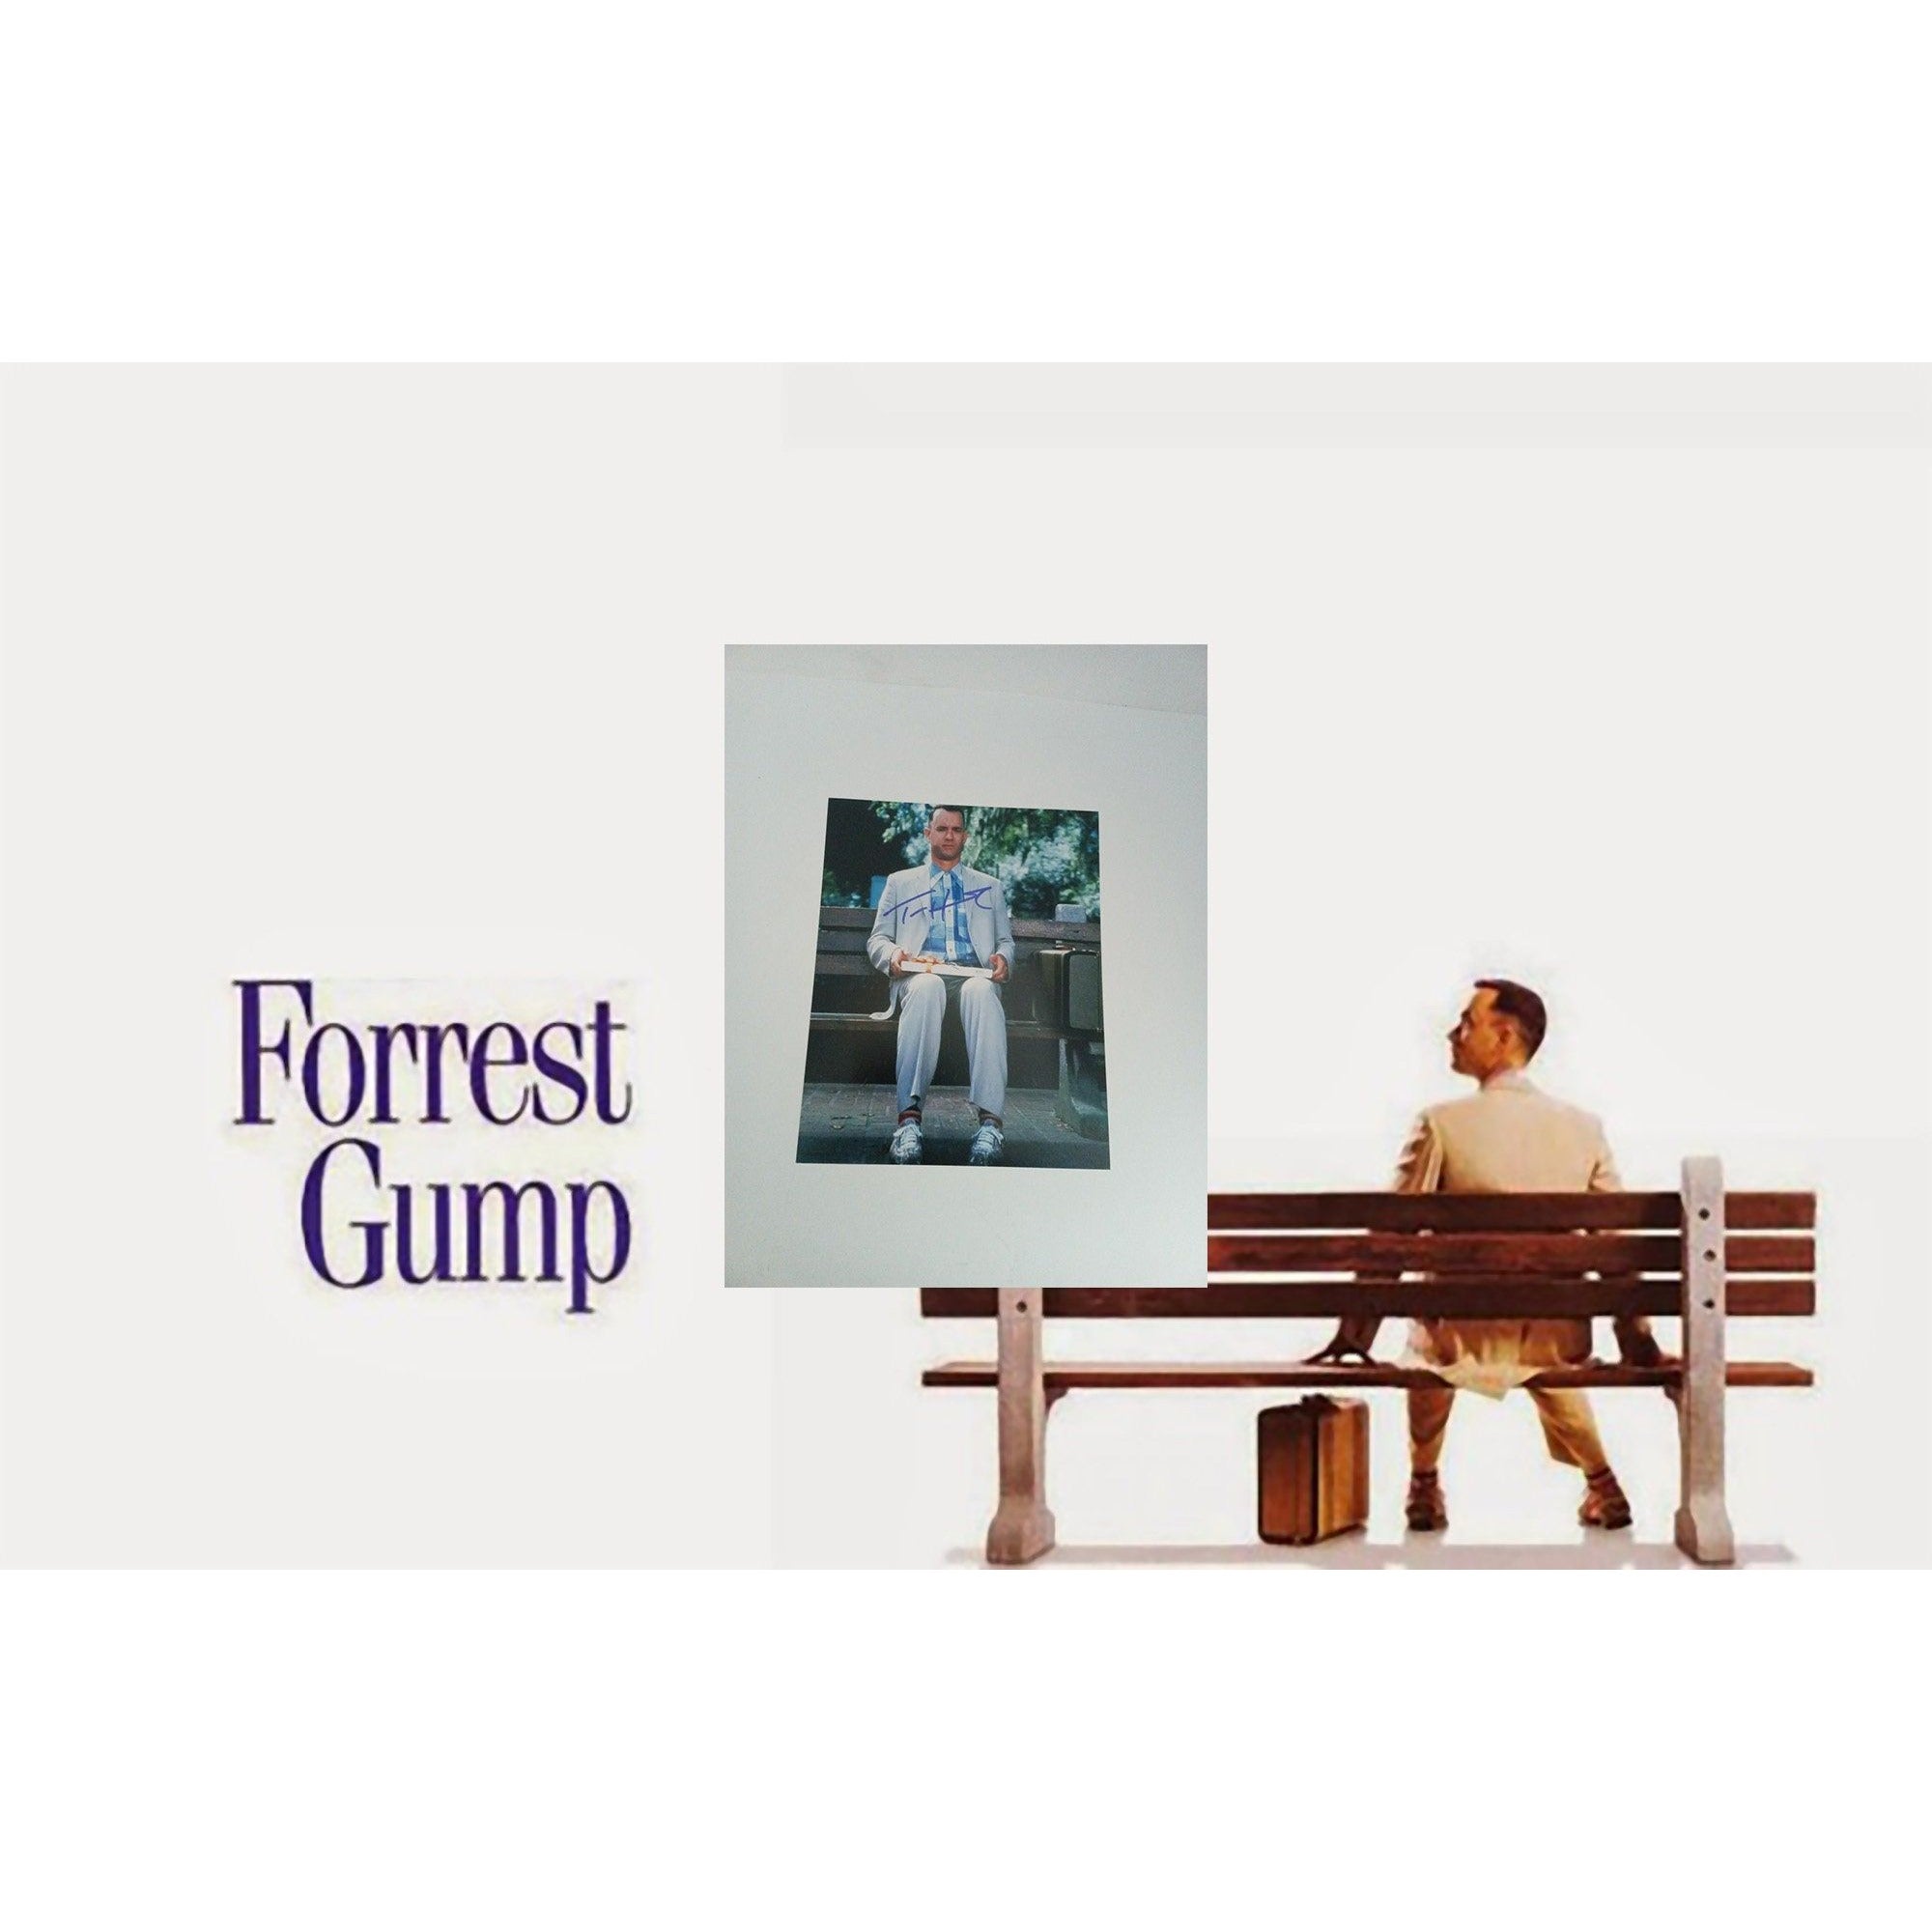 Tom Hanks Forrest Gump 8 x 10 sign photo with proof